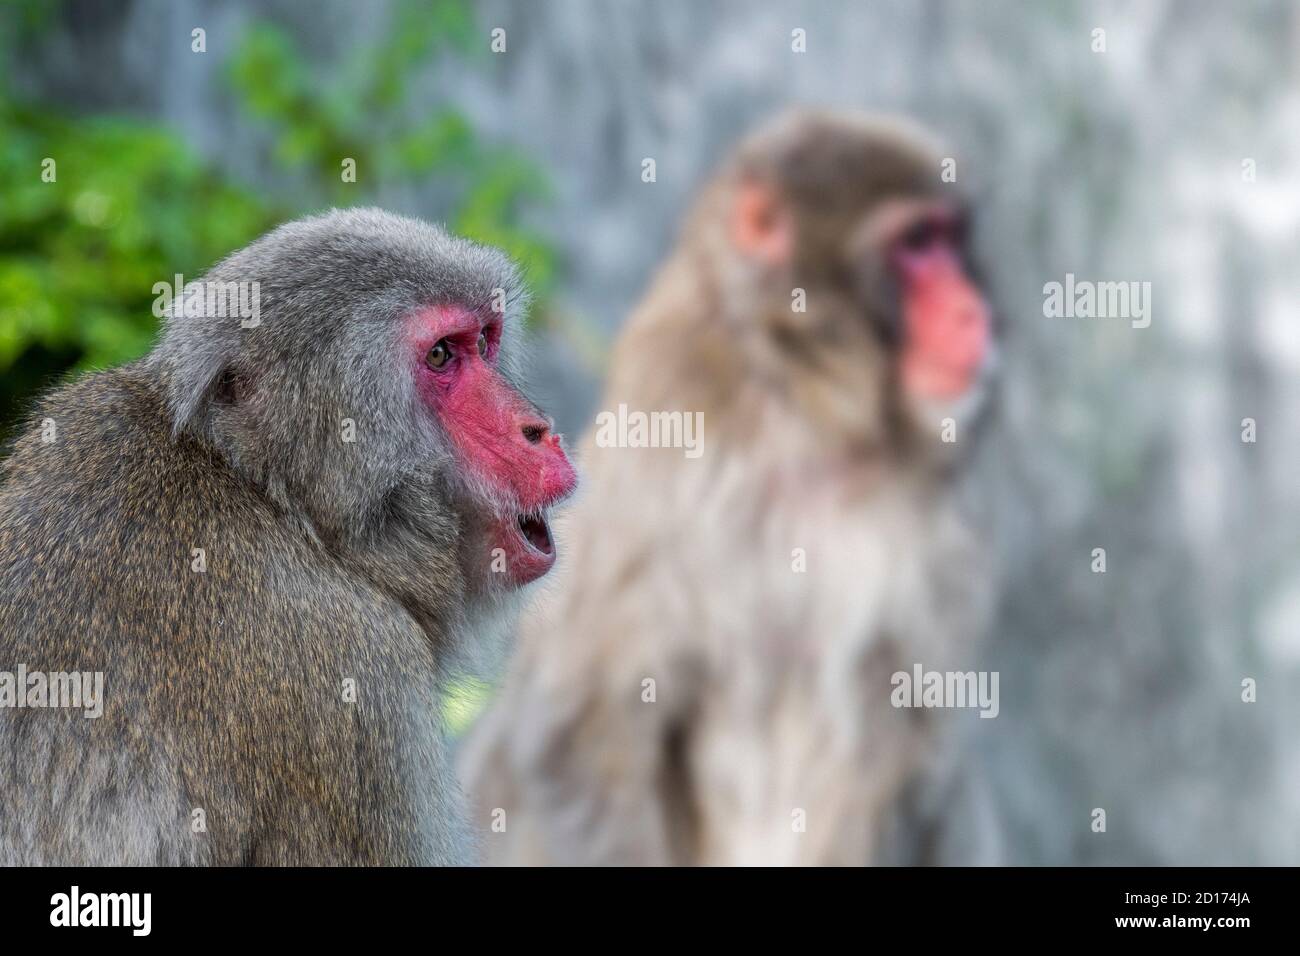 Two Japanese macaques / snow monkeys (Macaca fuscata) close-up portrait of macaque calling, native to Japan Stock Photo